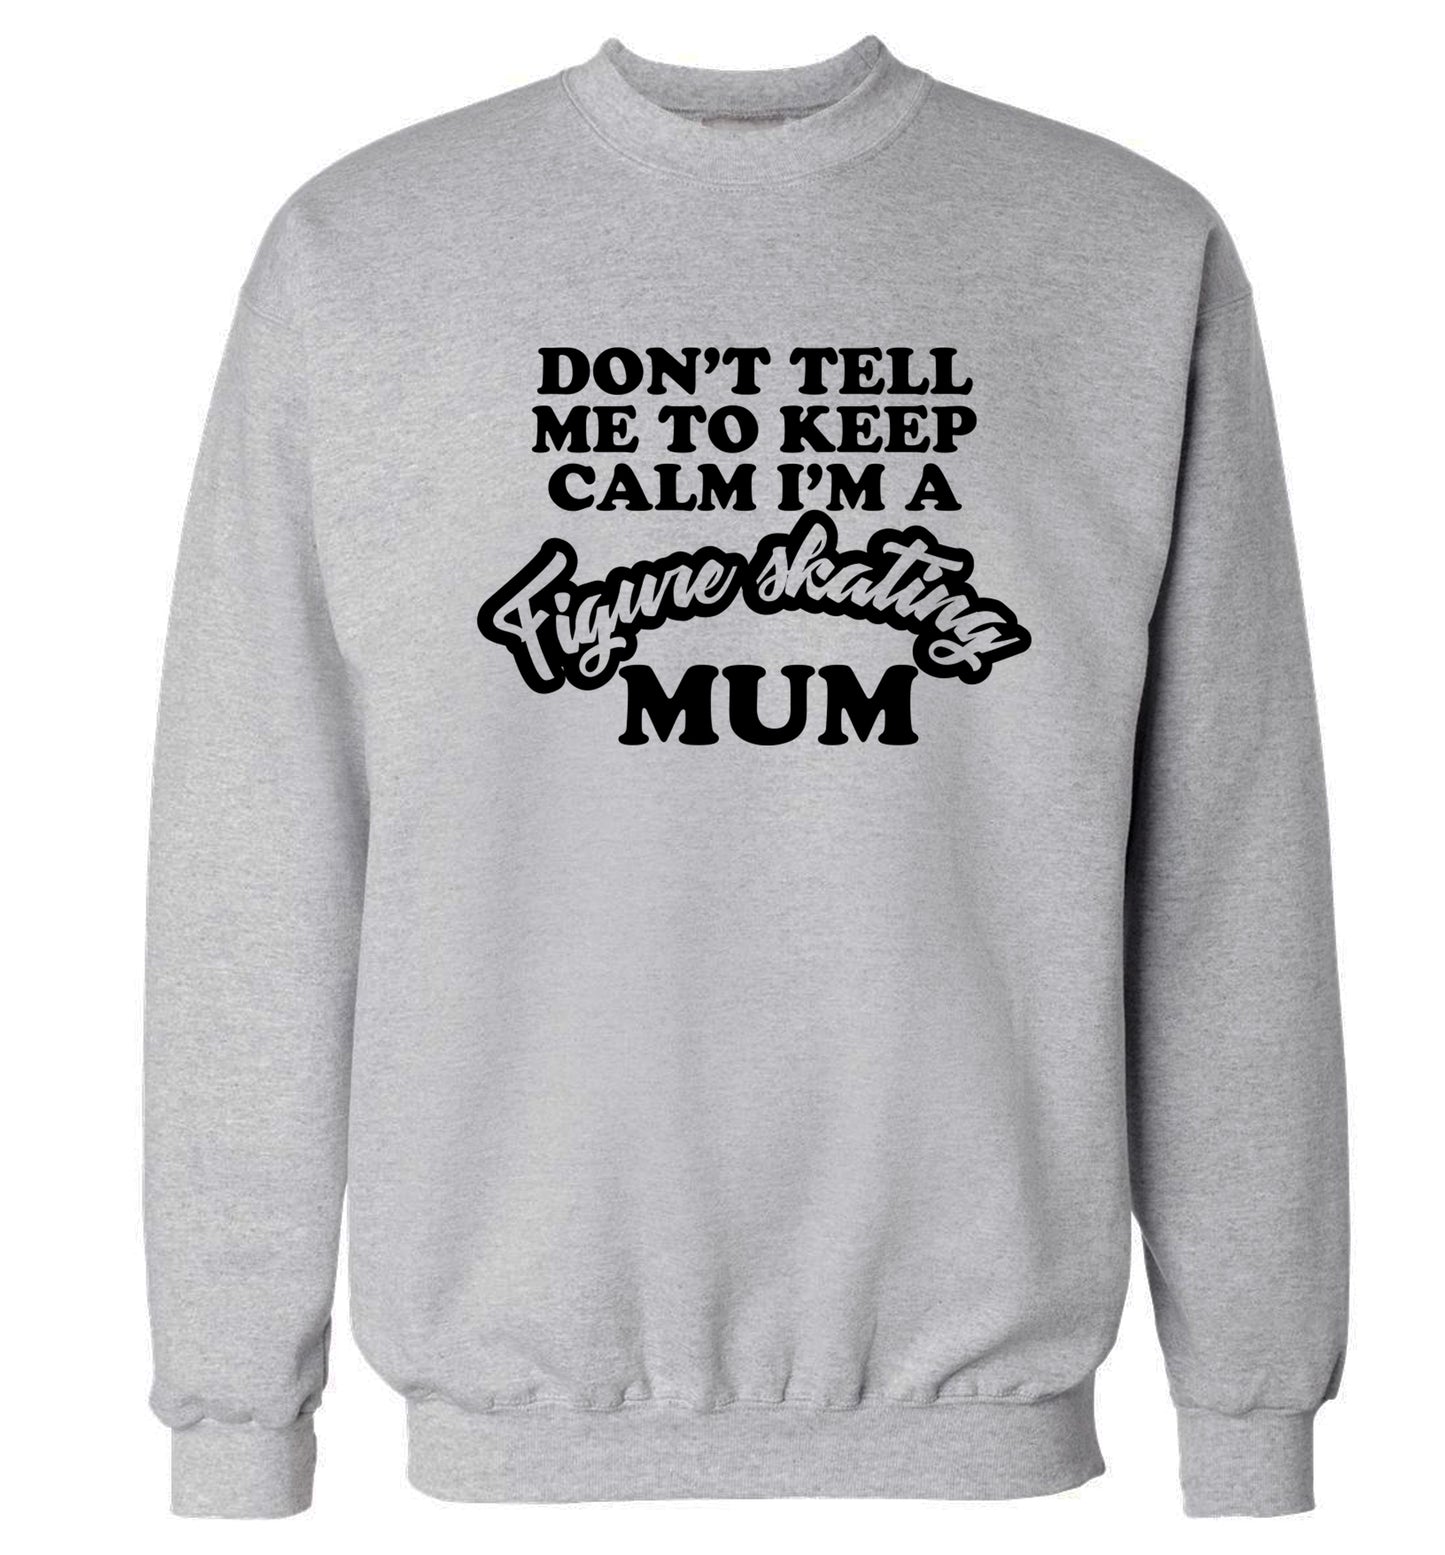 Don't tell me to keep calm I'm a figure skating mum Adult's unisexgrey Sweater 2XL